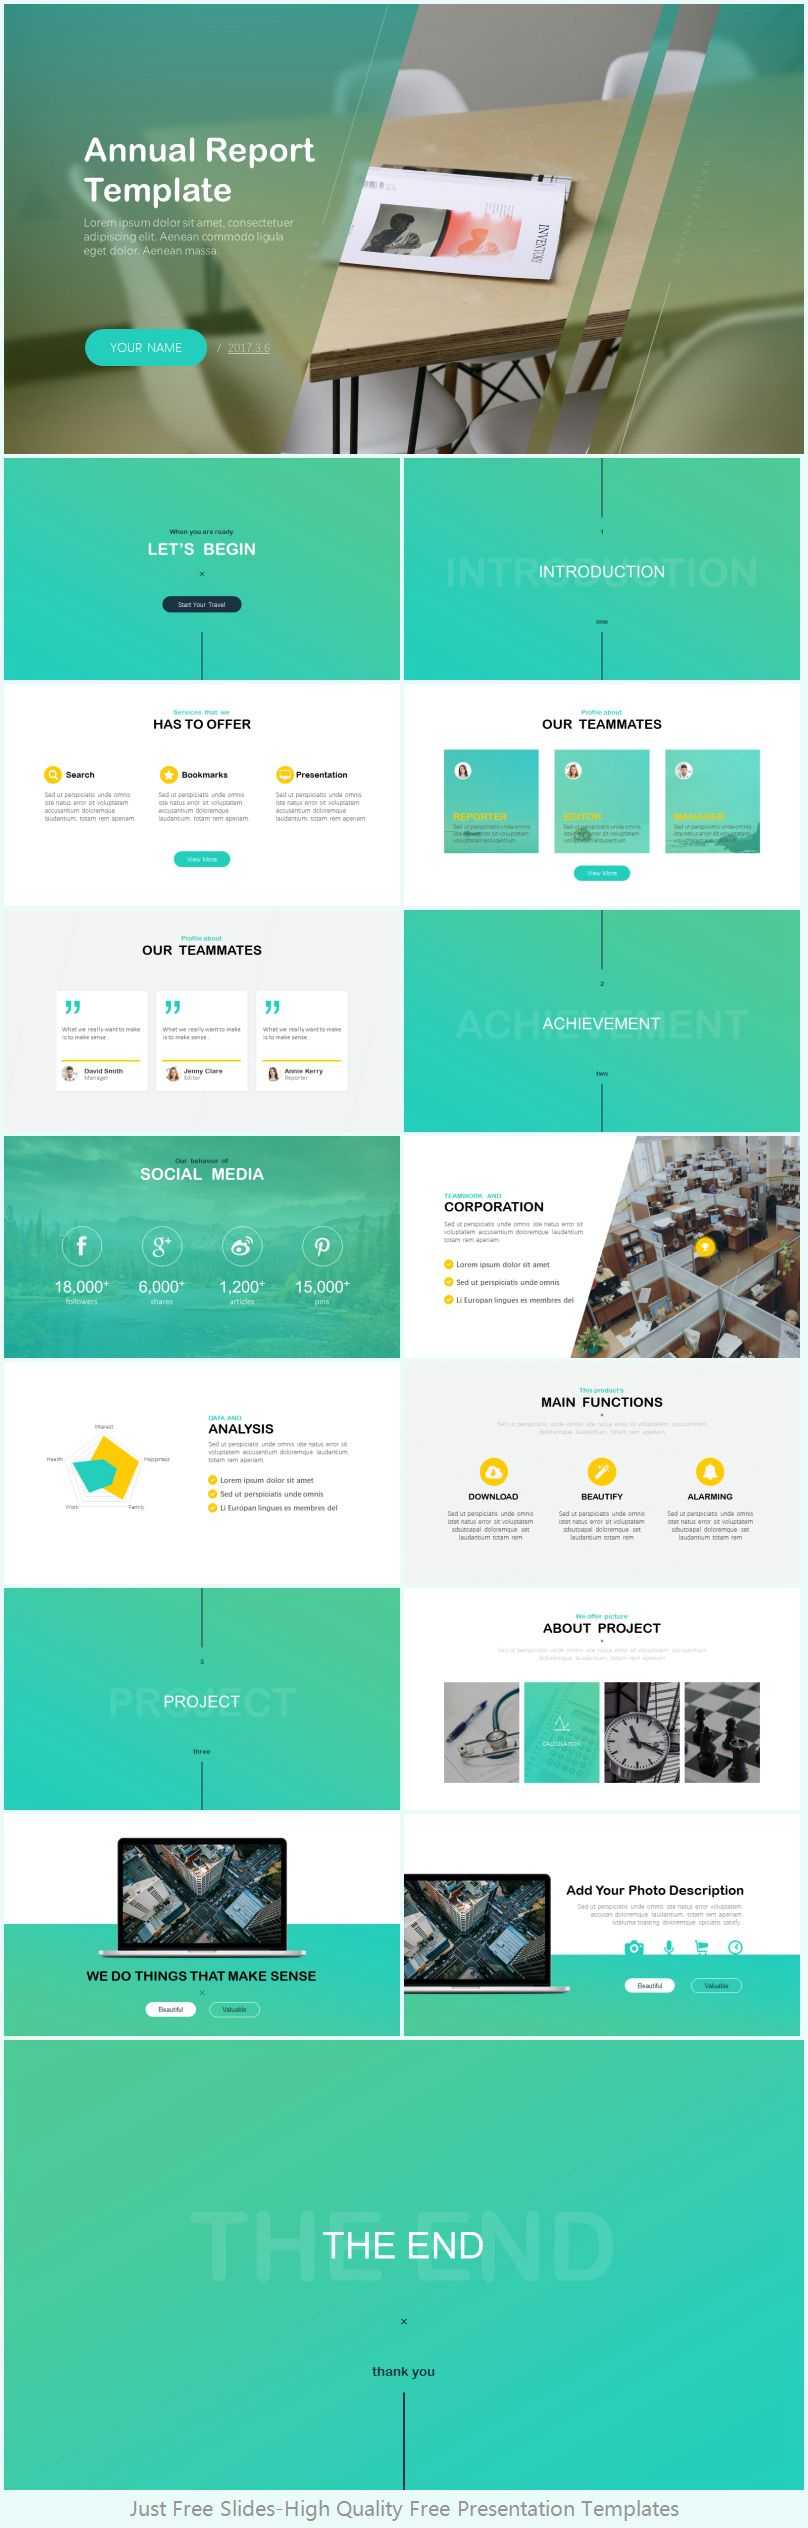 Annual Report Powerpoint Template – Just Free Slides Intended For Annual Report Ppt Template